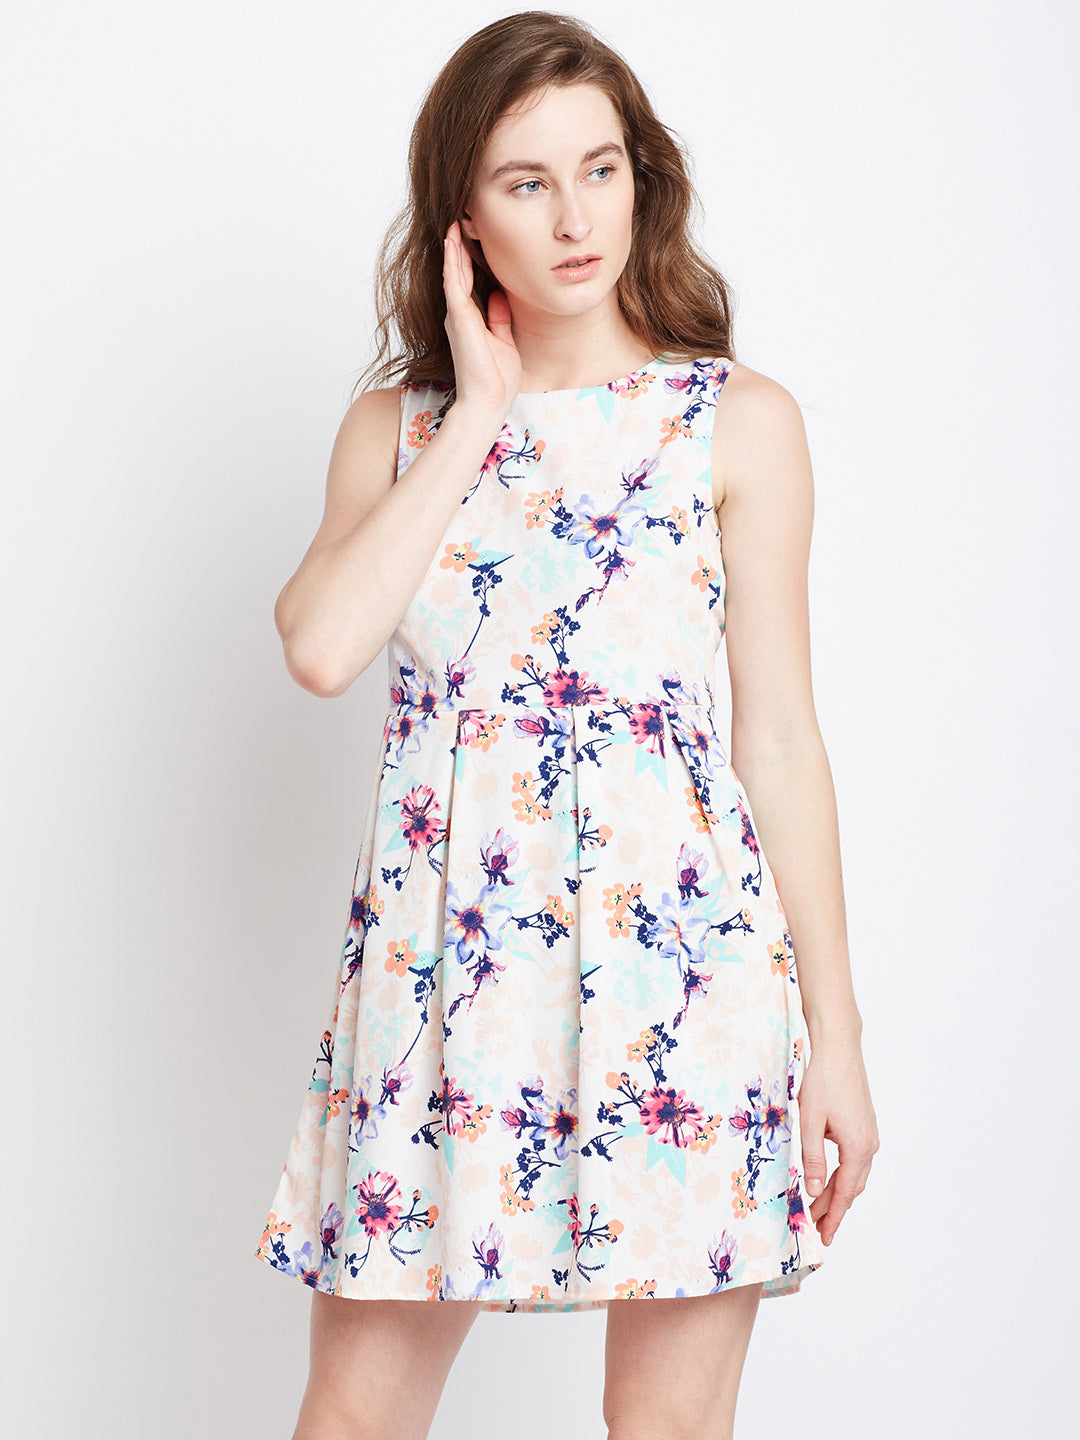 Off-White Printed Fit and Flare Dress - Berrylush